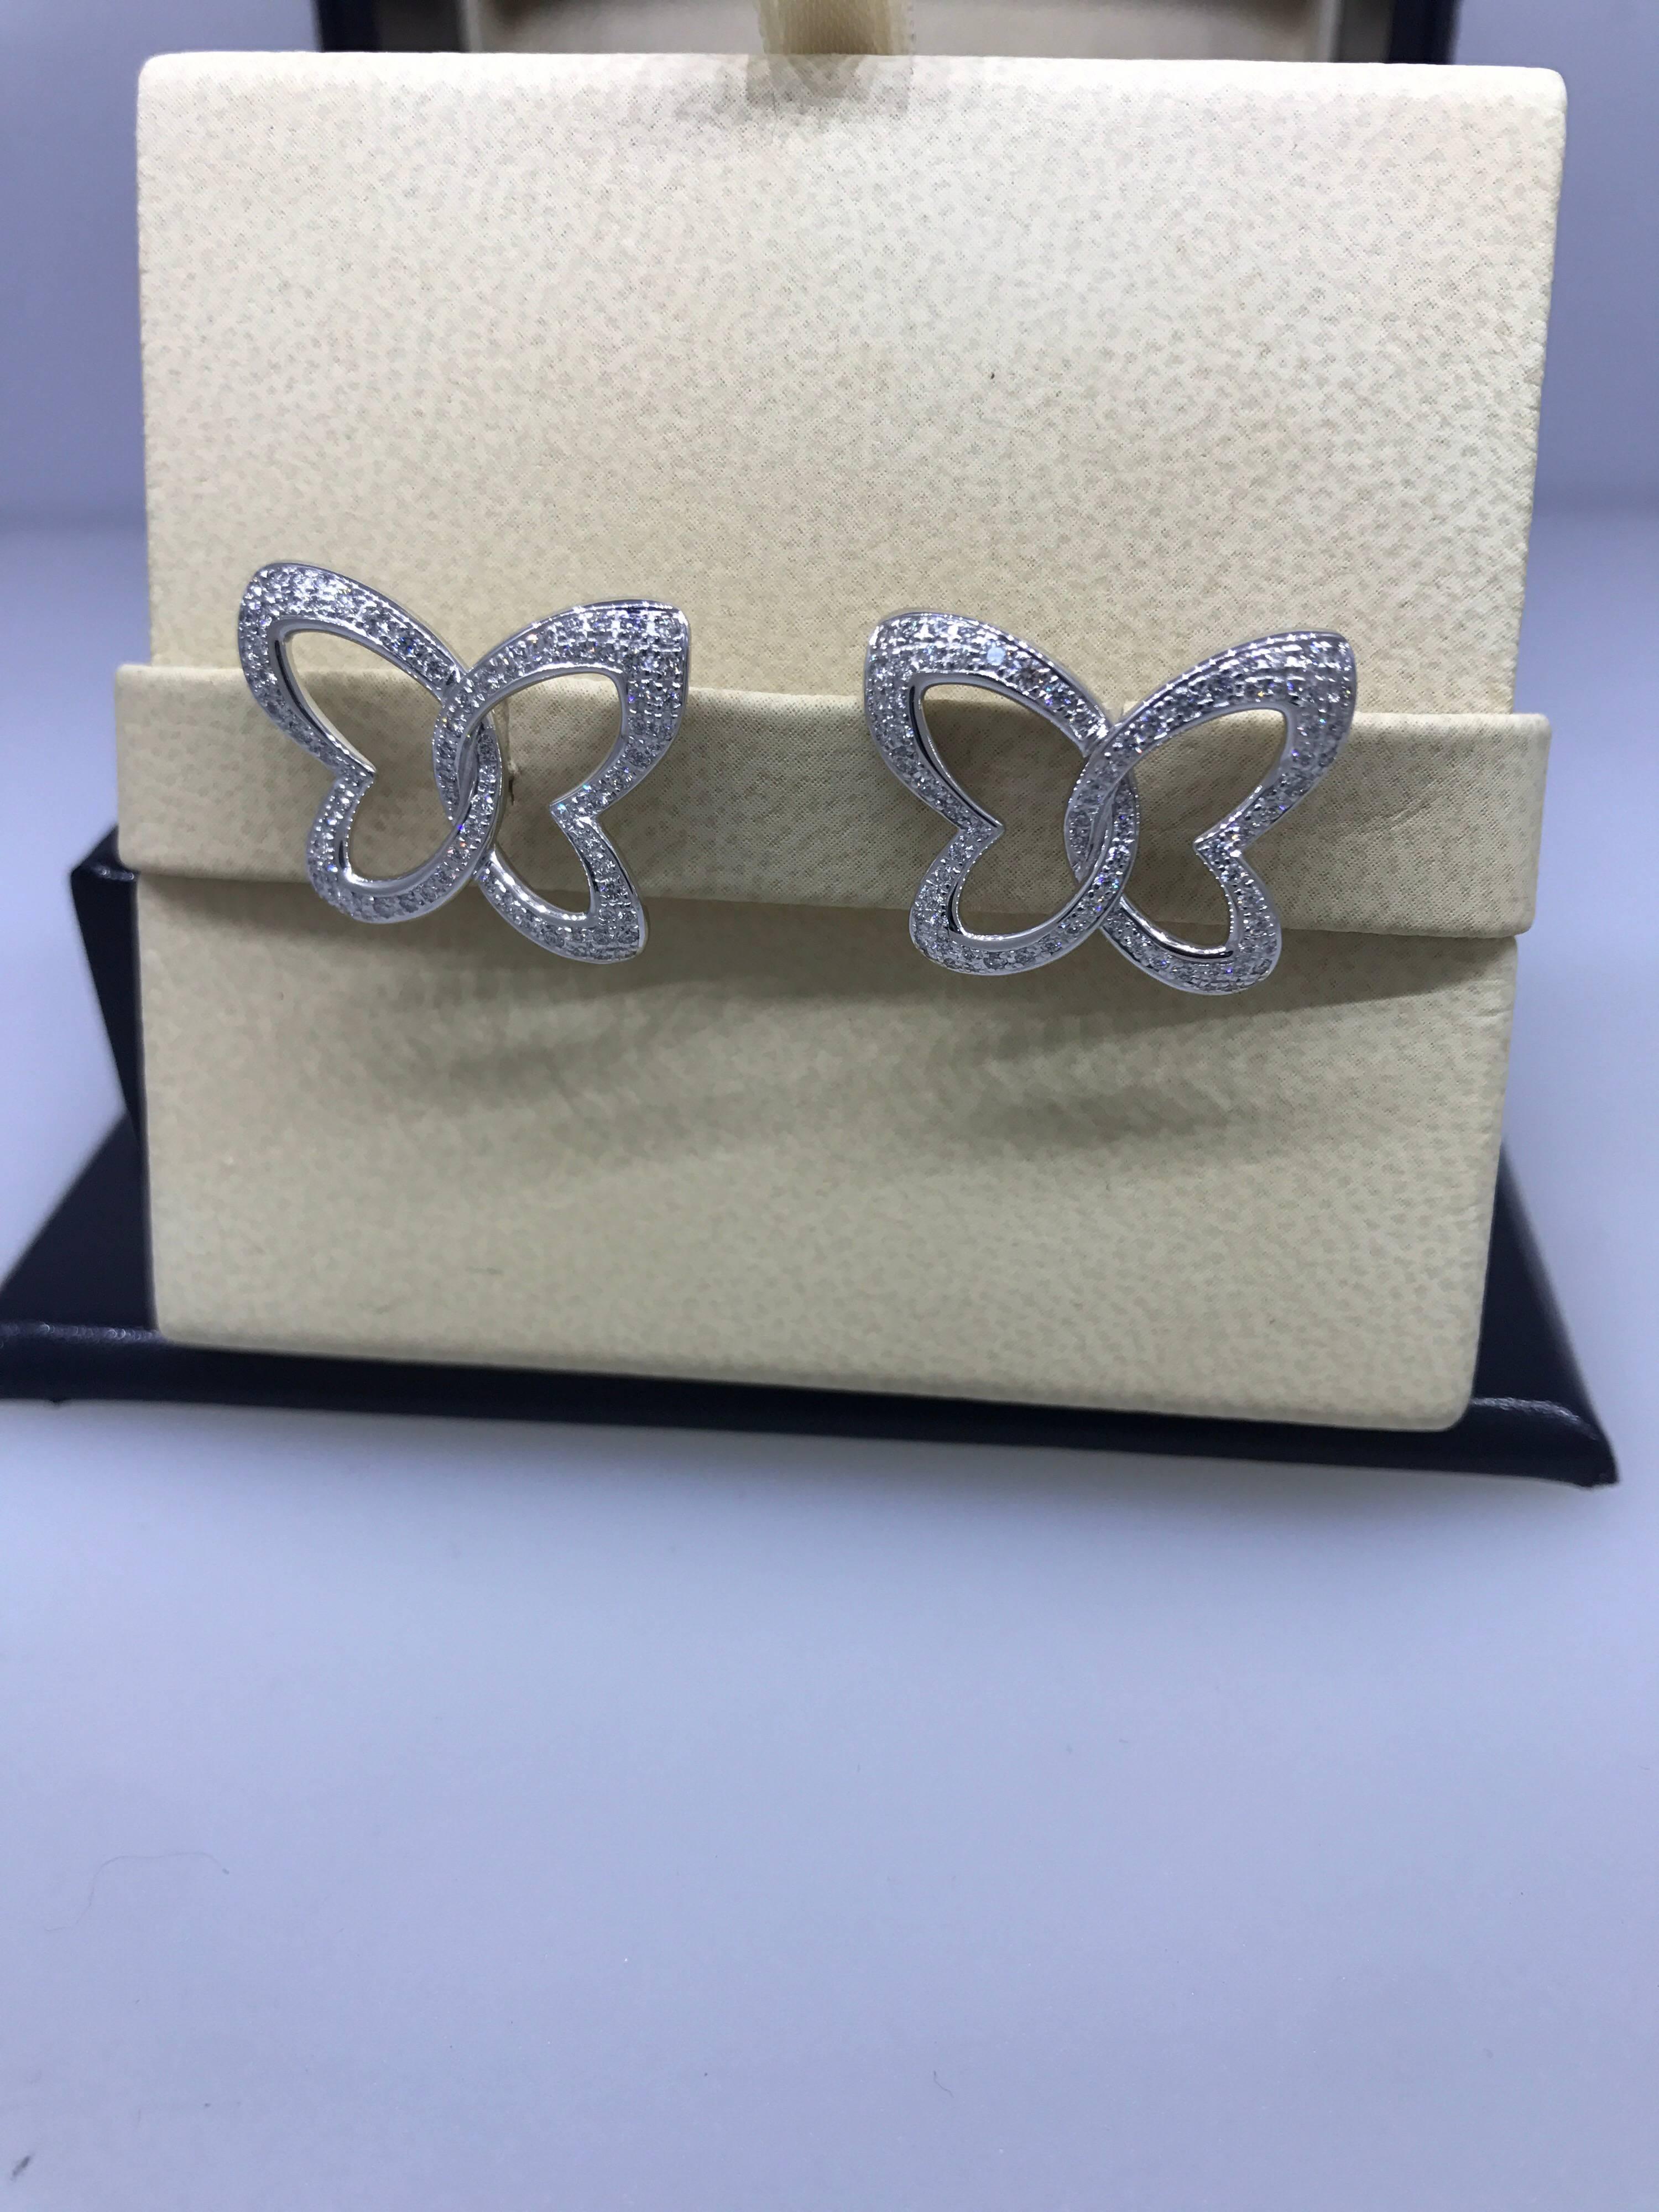 Chopard Women's Butterfly Stud Earrings

Model Number: 83/7445-1002

100% Authentic

Brand New

Comes with original Chopard box, certificate of authenticity and warranty, and jewels manual

18 Karat White Gold (8.70gr)

158 Diamonds total on the